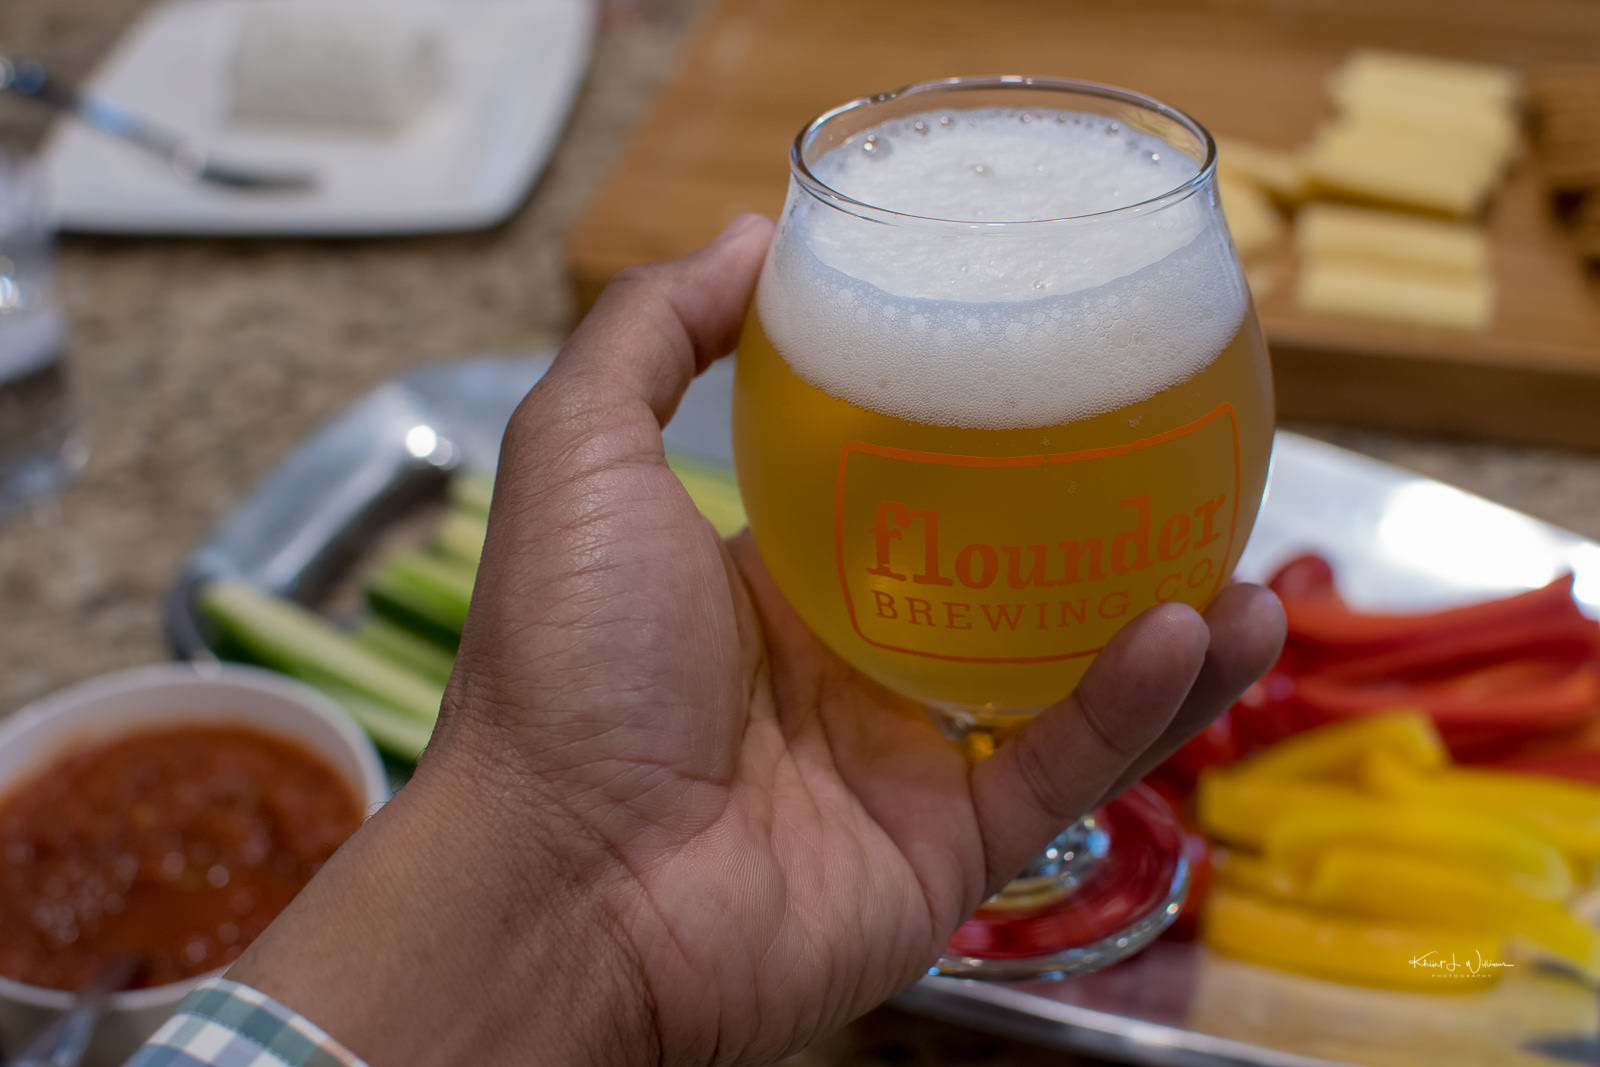 Flounder Brewing Co's Summer’s Calling